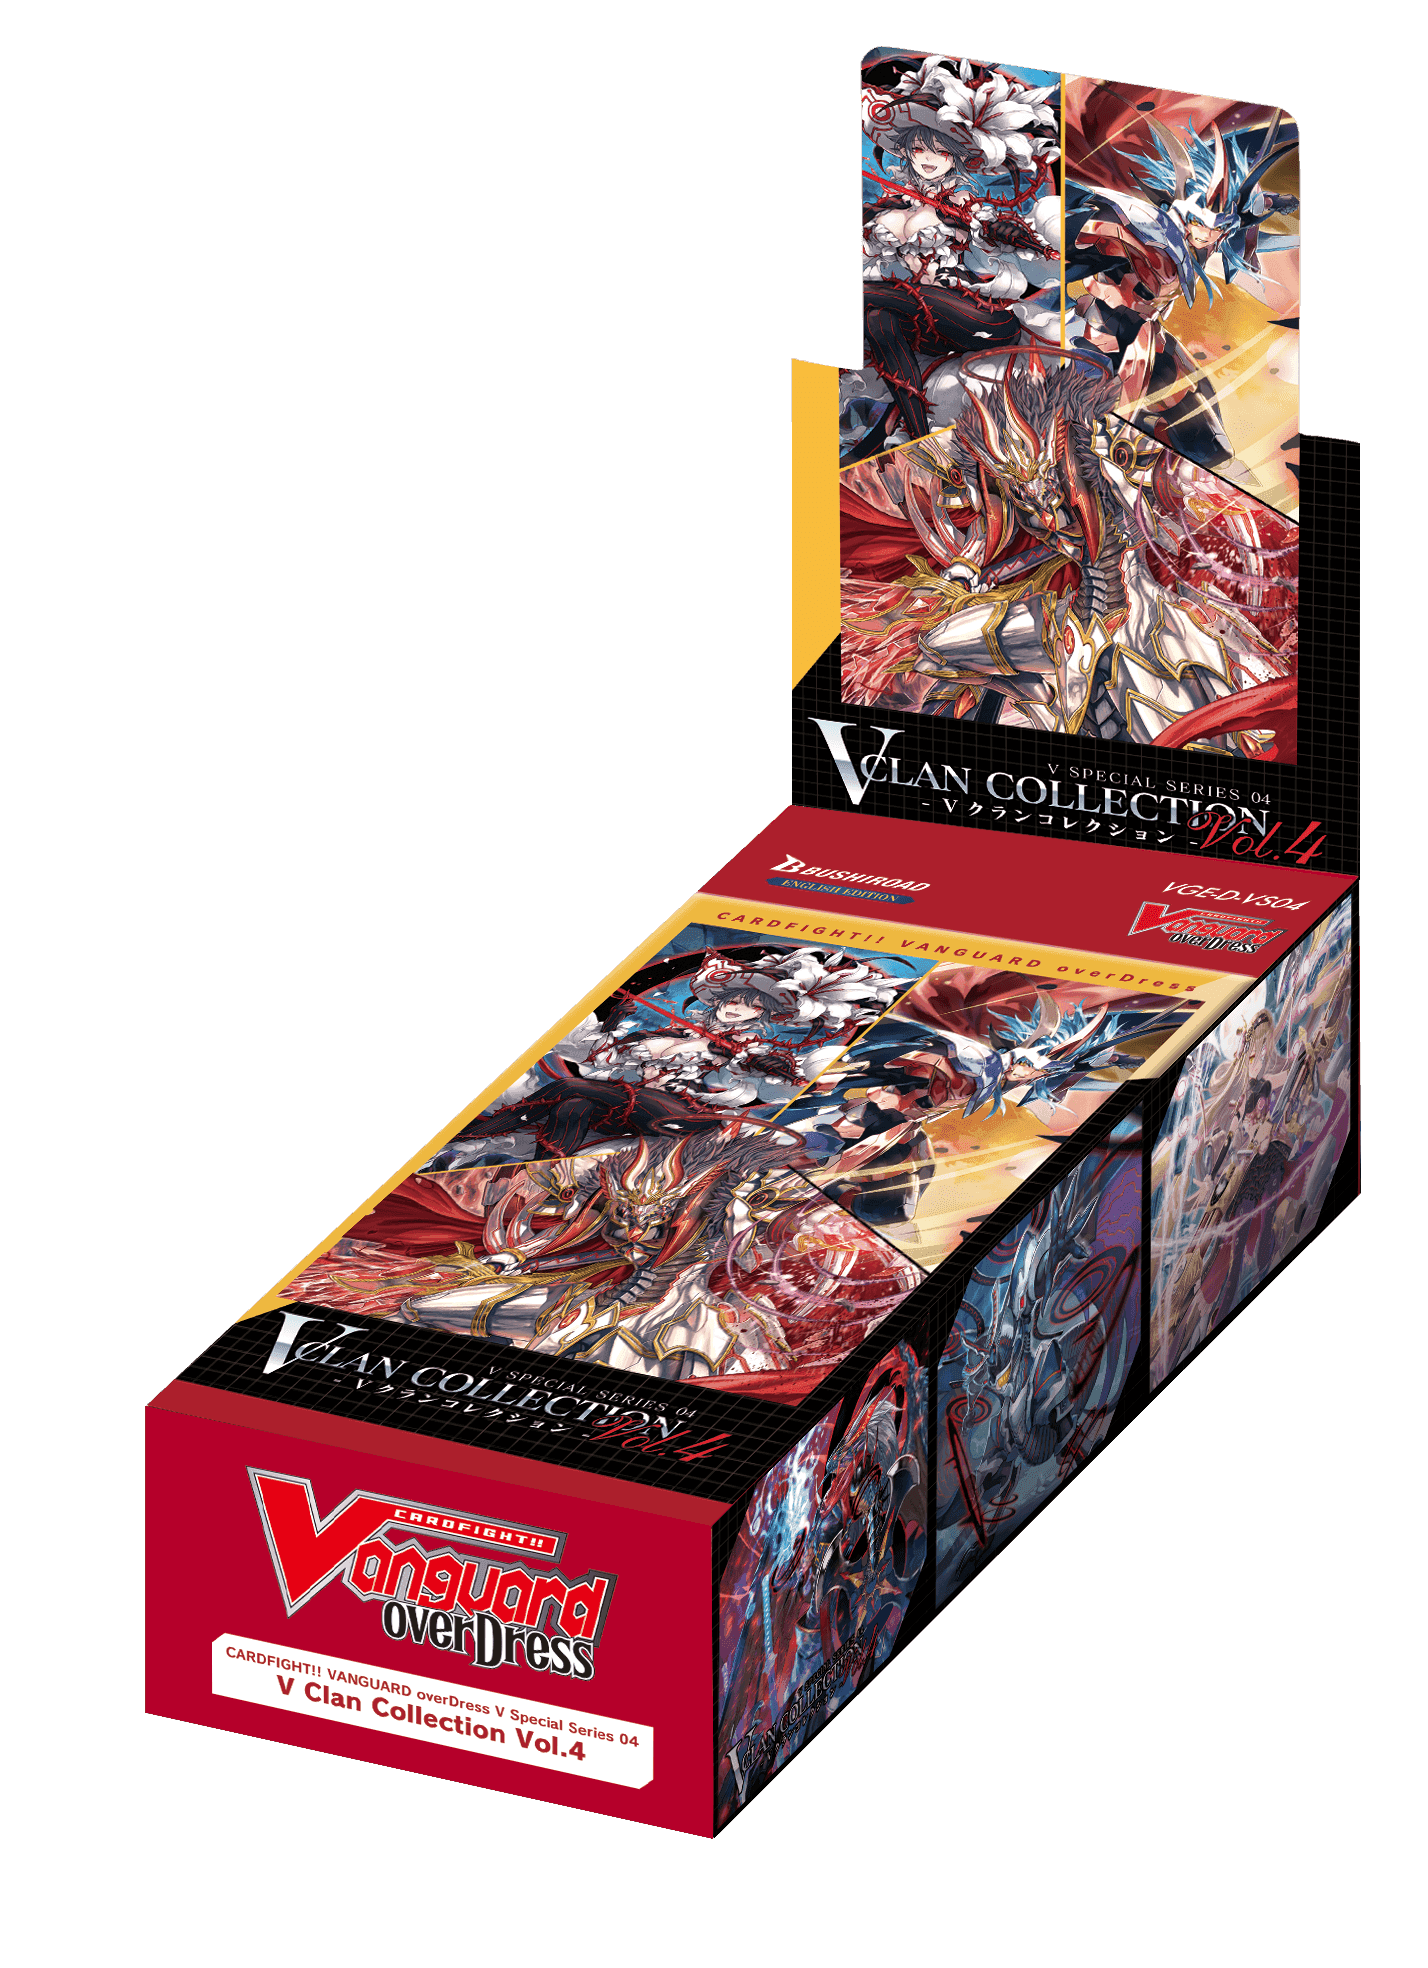 Cardfight!! Vanguard - OverDress: V Special Series - V Clan Collection Vol.4 Booster Box - The Card Vault